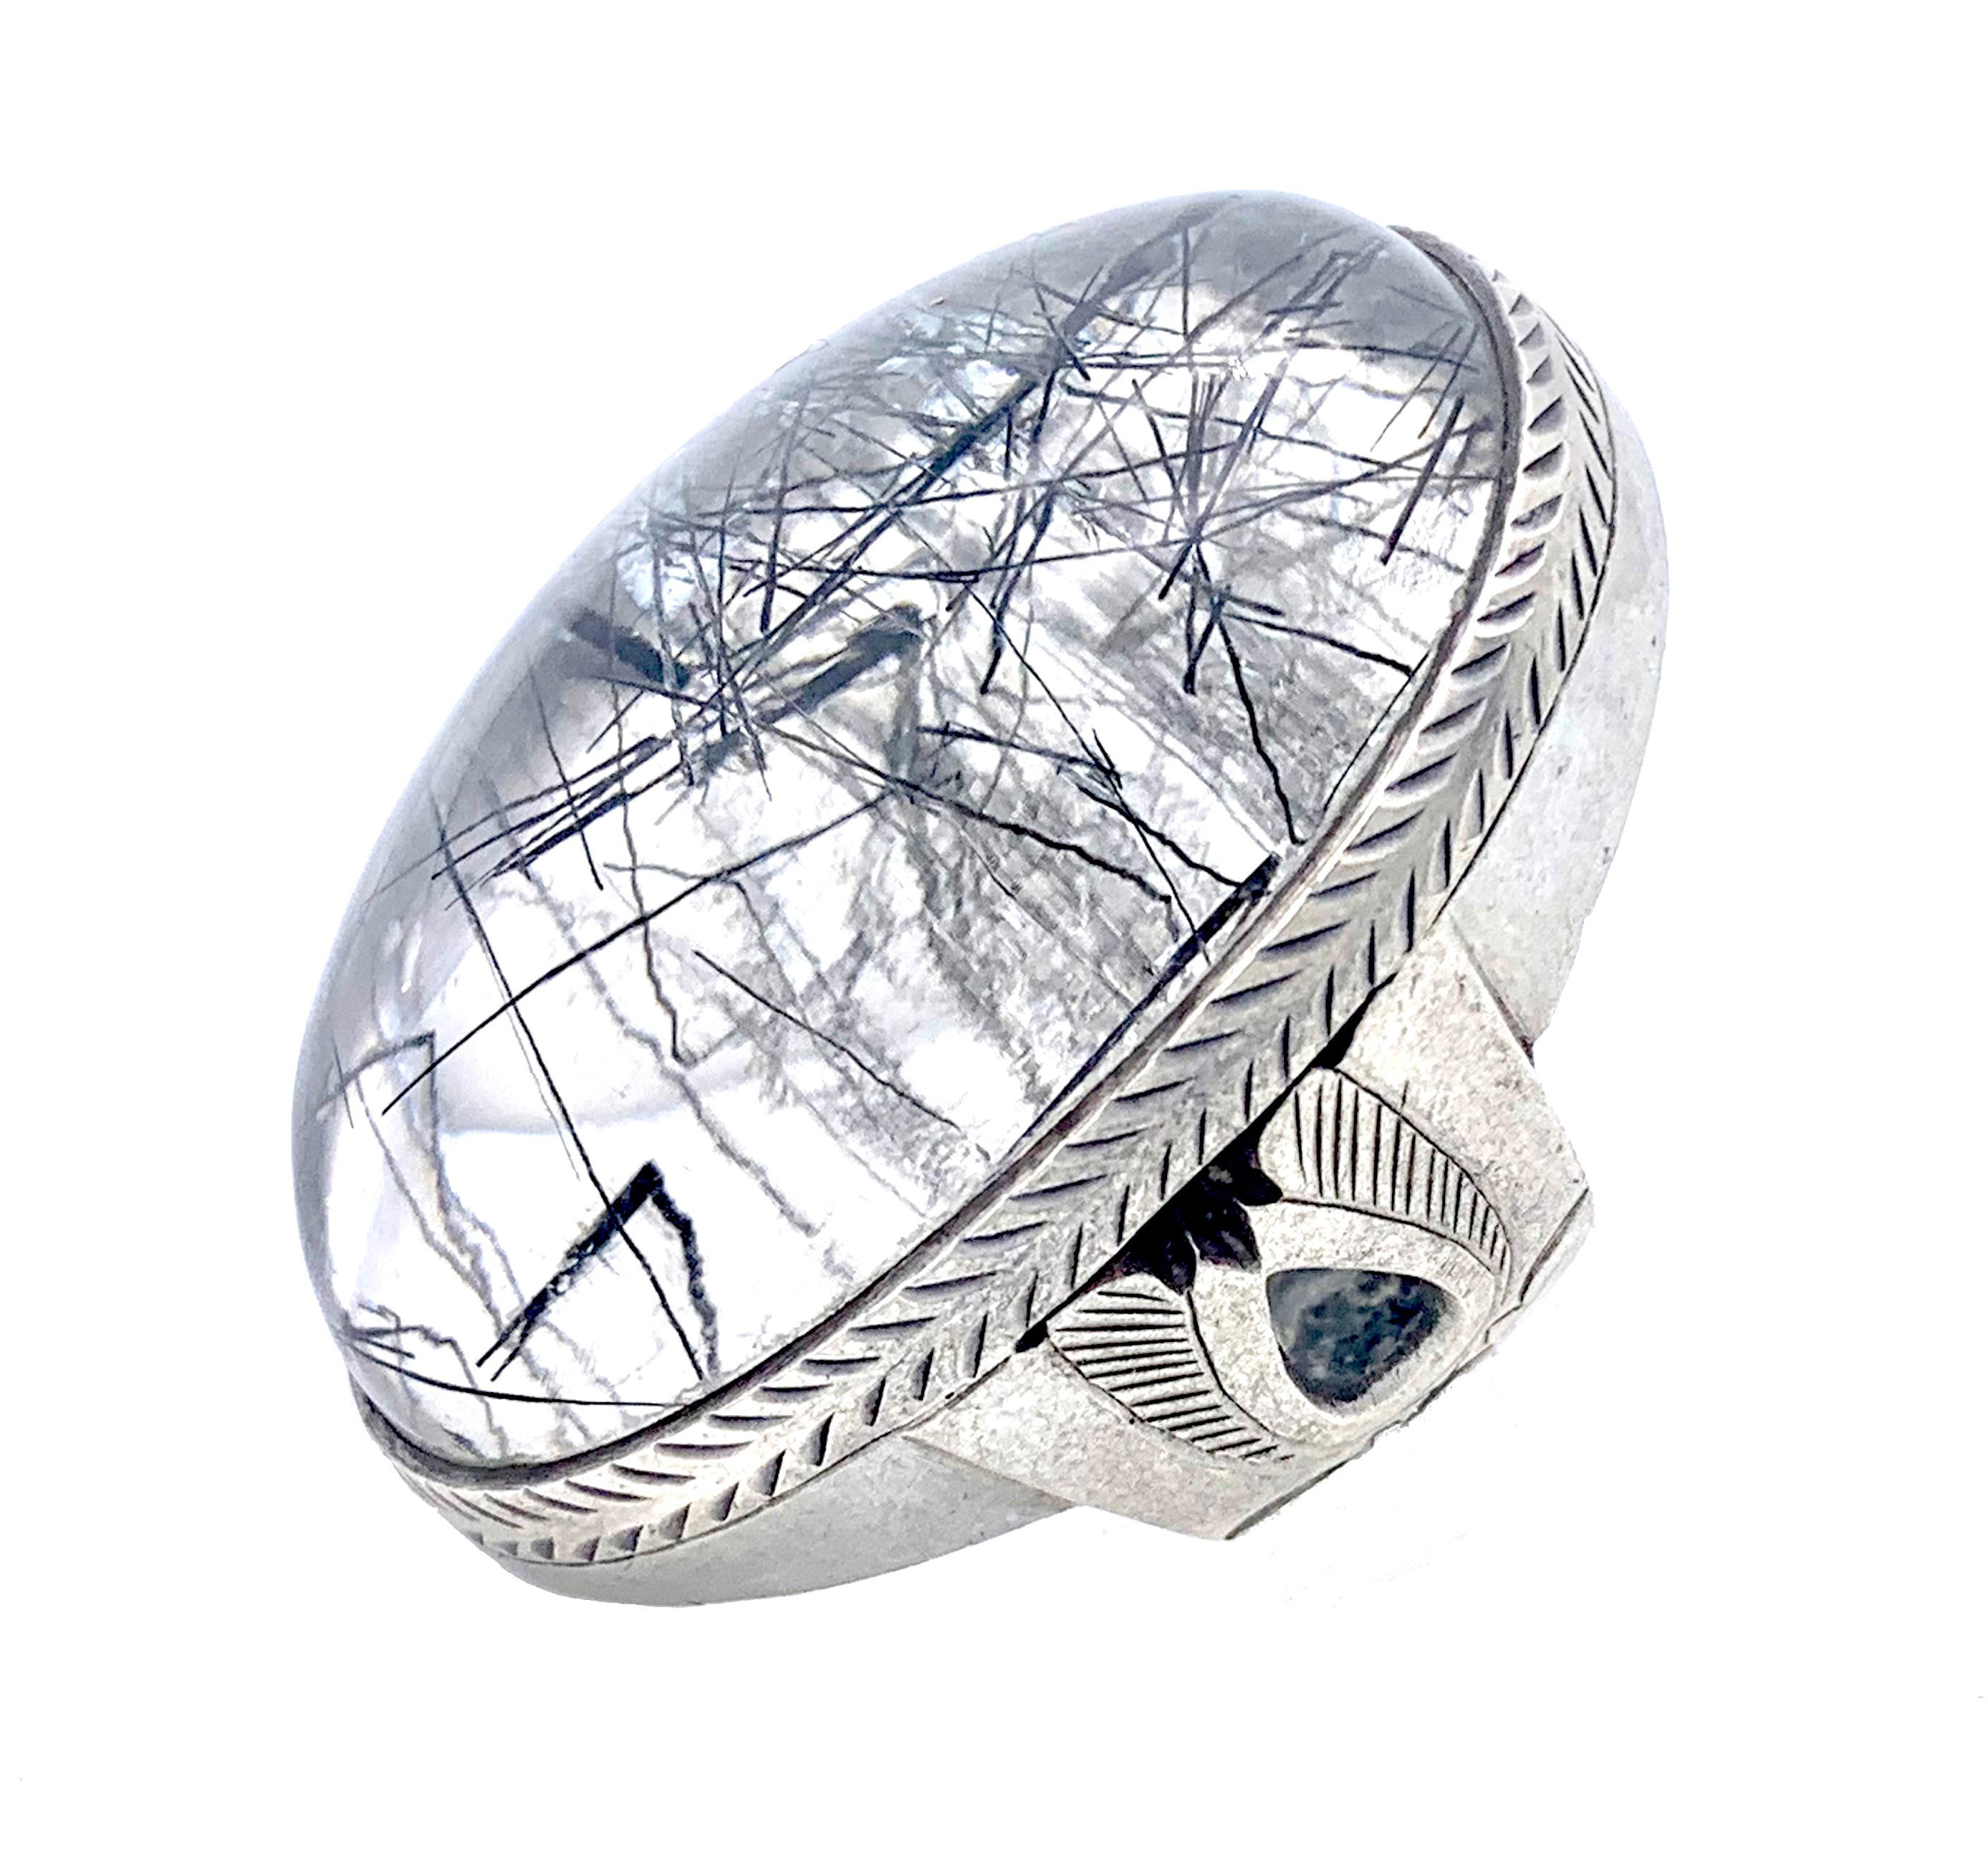 This ring is set with a rutile quarz cabochon in a silver setting engraved with a fishbone pattern. The silver shank is decorated with pierced ornaments and engravings reminiscent of wings. 